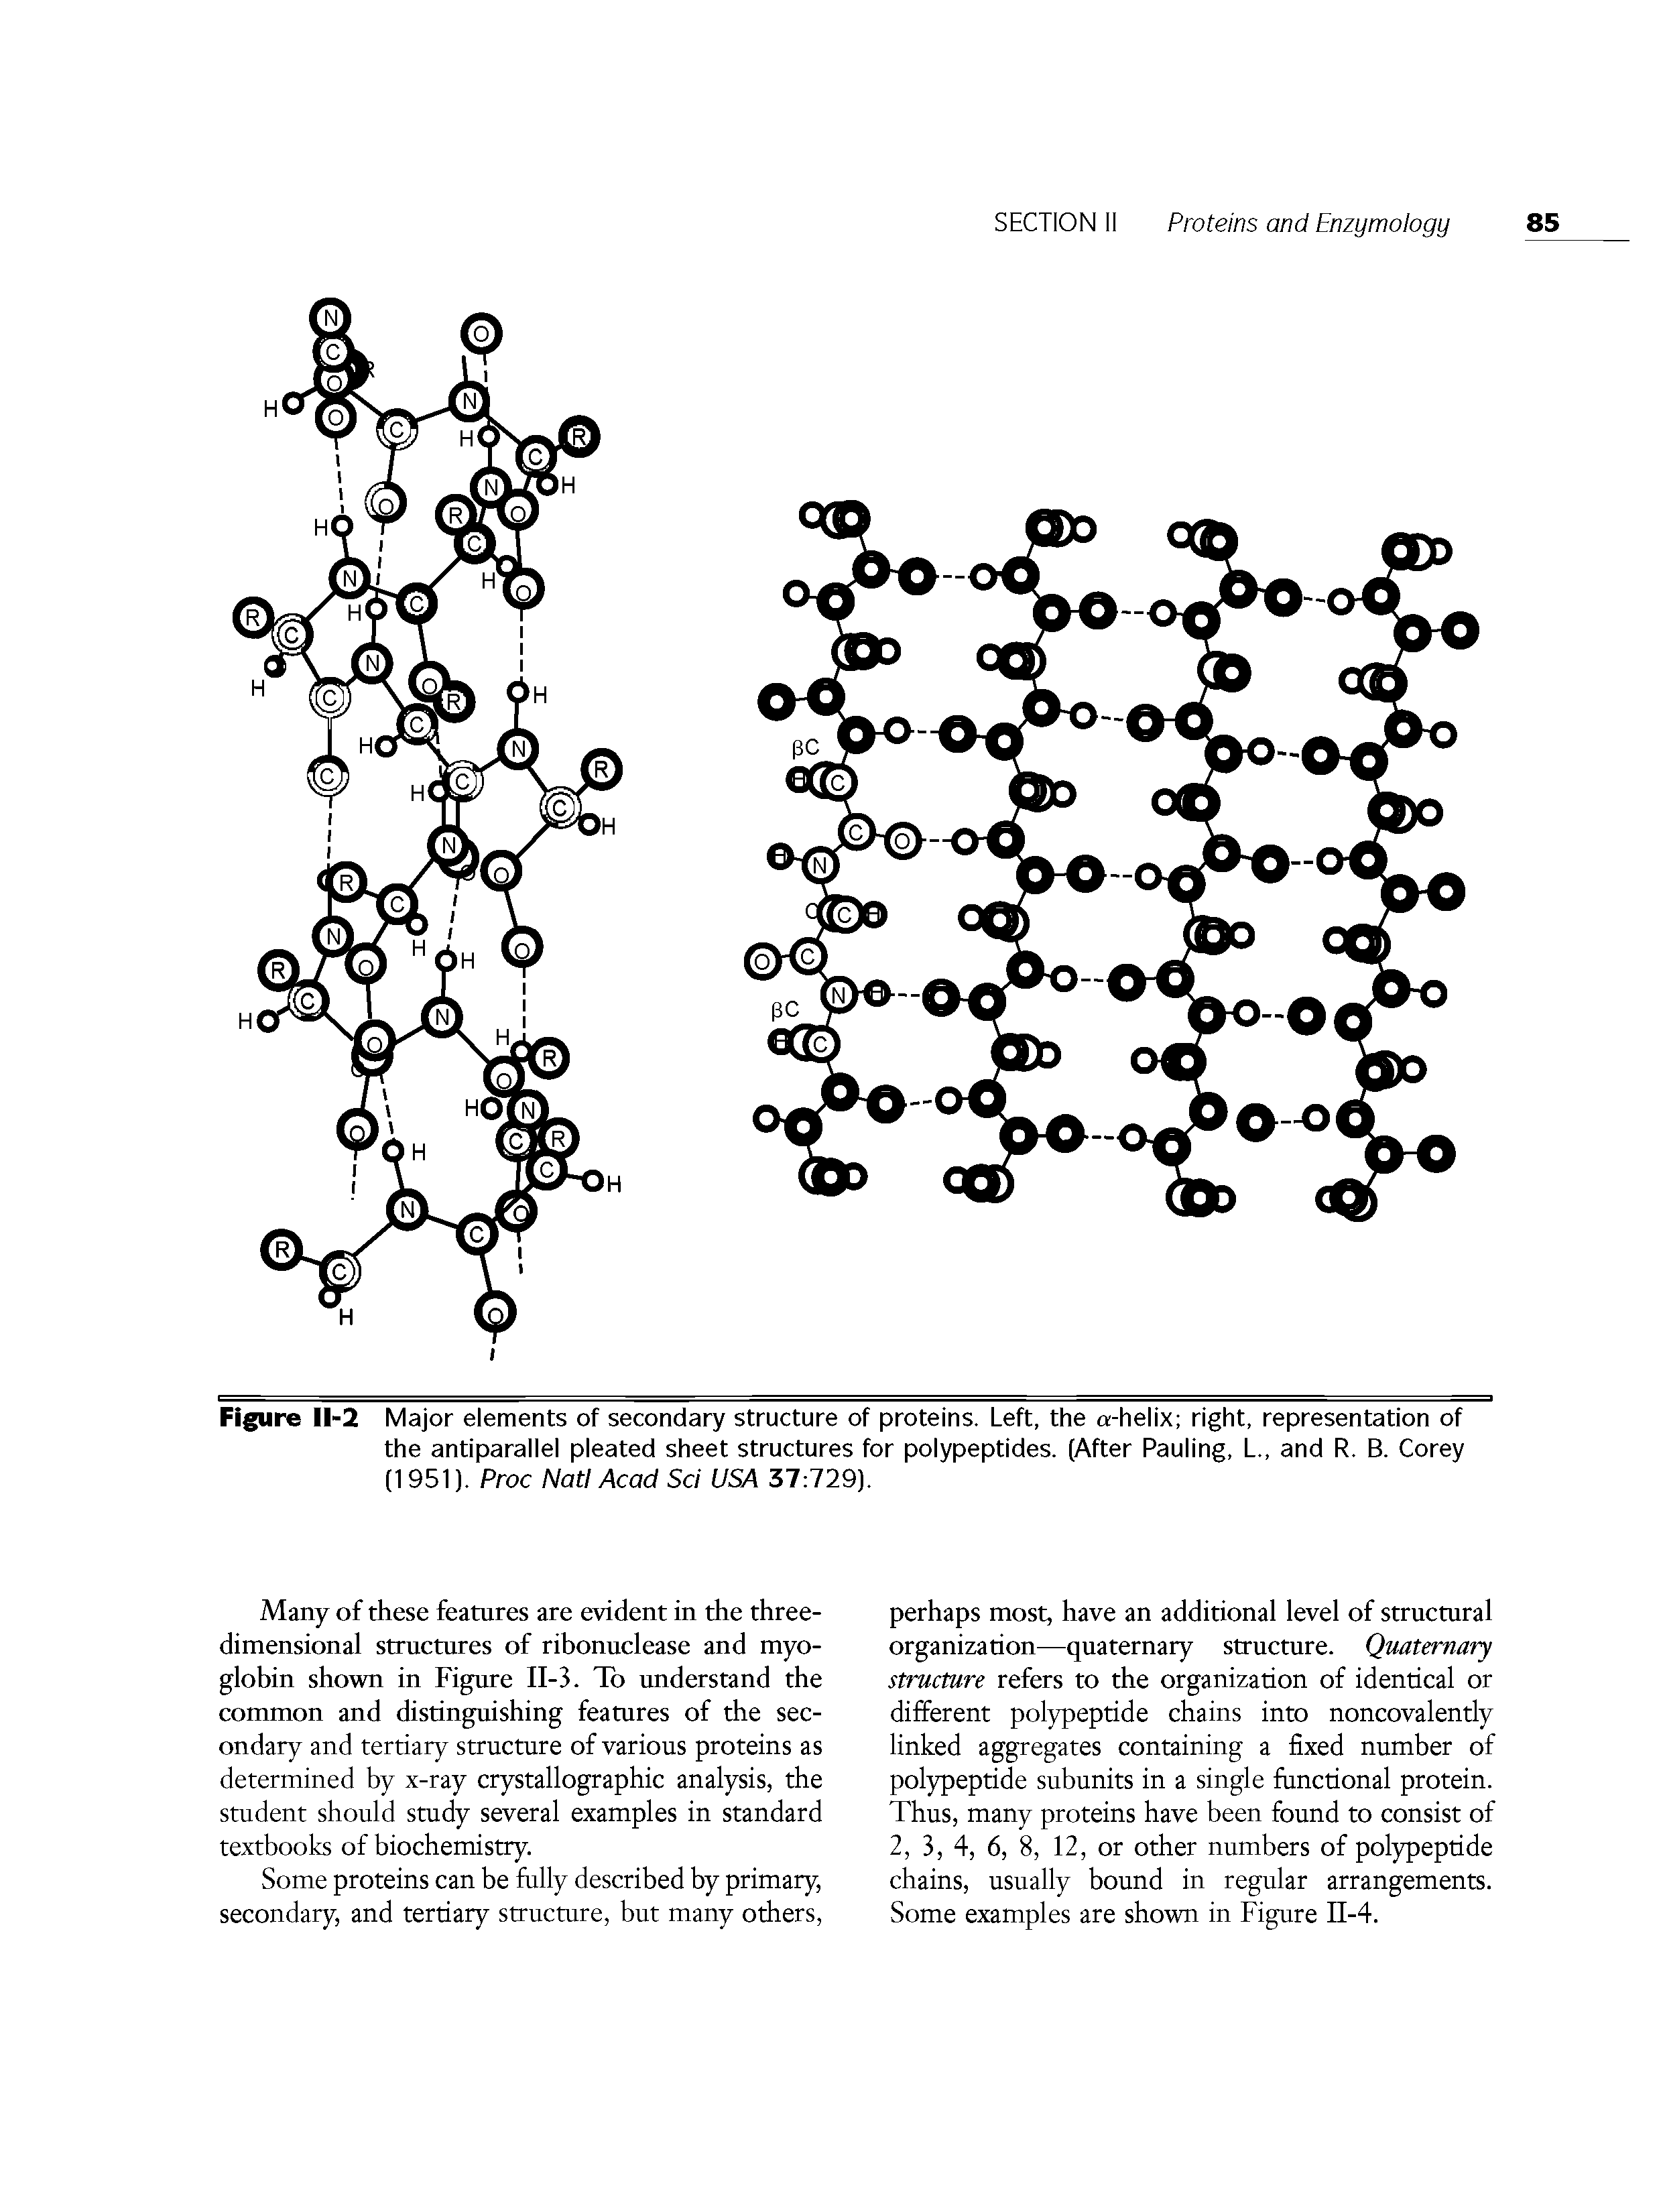 Figure II-2 Major elements of secondary structure of proteins. Left, the a-helix right, representation of the antiparallel pleated sheet structures for polypeptides. (After Pauling, L., and R. B. Corey (1951). Proc Natl Acad Sci USA 37 729).